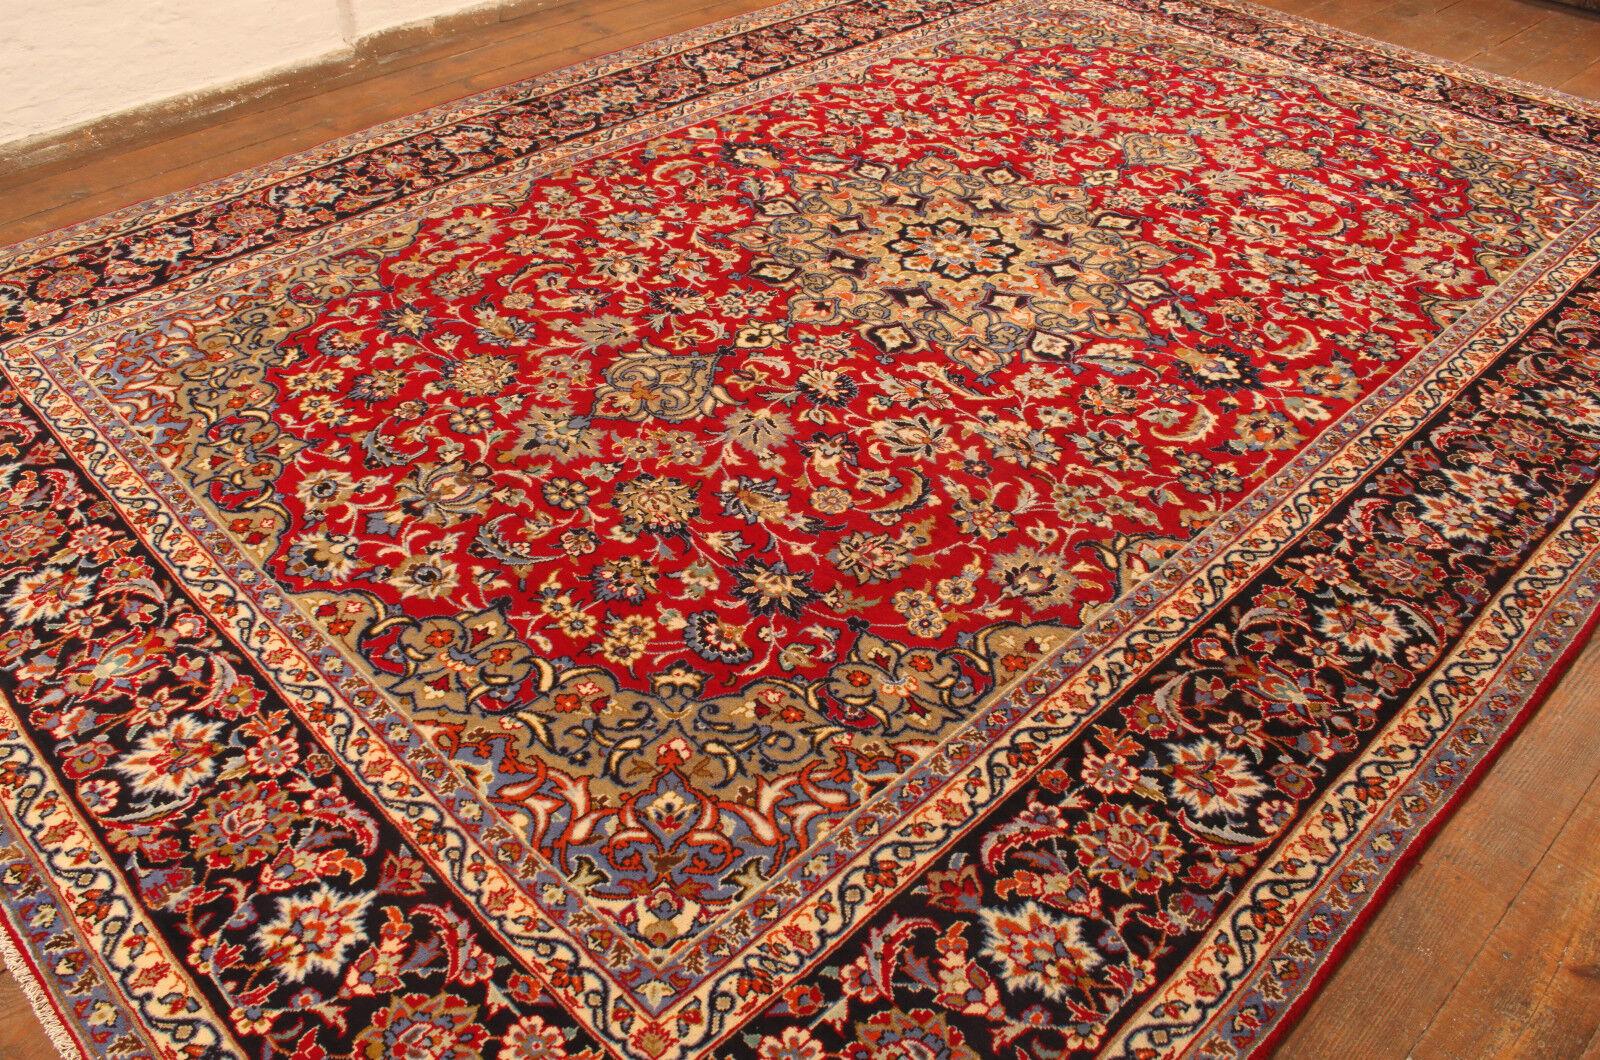 Handmade Vintage Persian Style Kashan Rug 9.6' x 14.1', 1960s - 1T15 In Good Condition For Sale In Bordeaux, FR